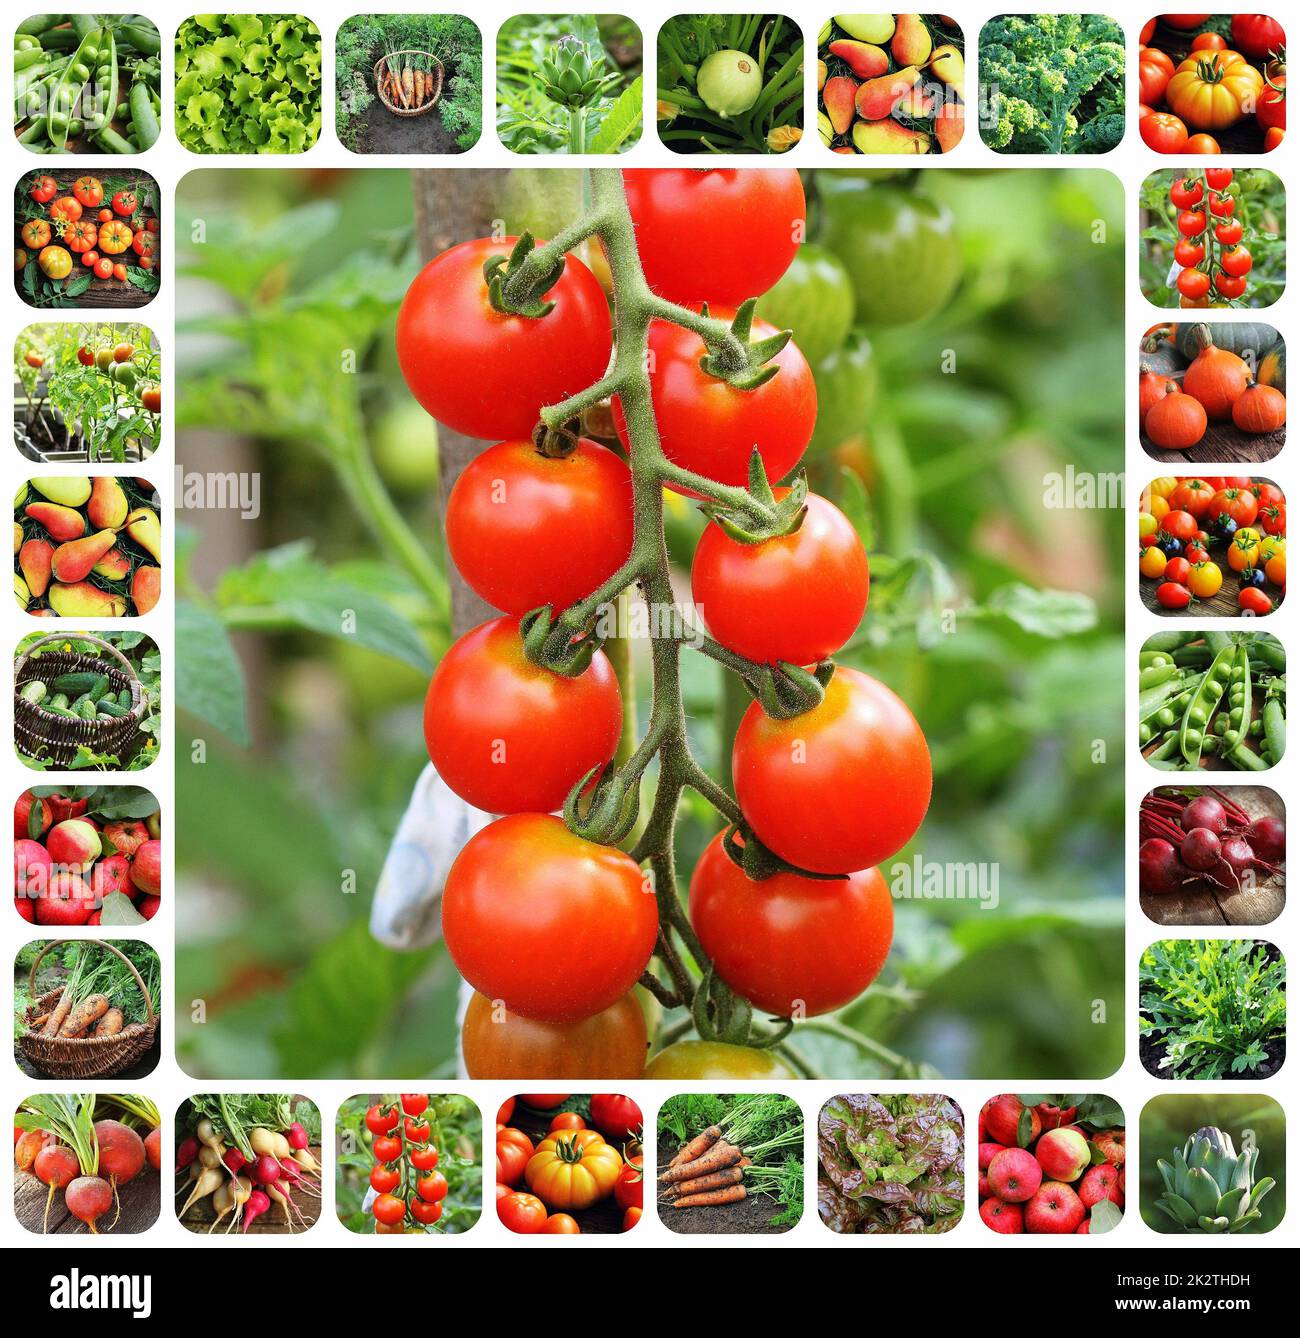 Collage of vegetables - products of vegetable garden. Healthy eating consept. Gardening background Stock Photo